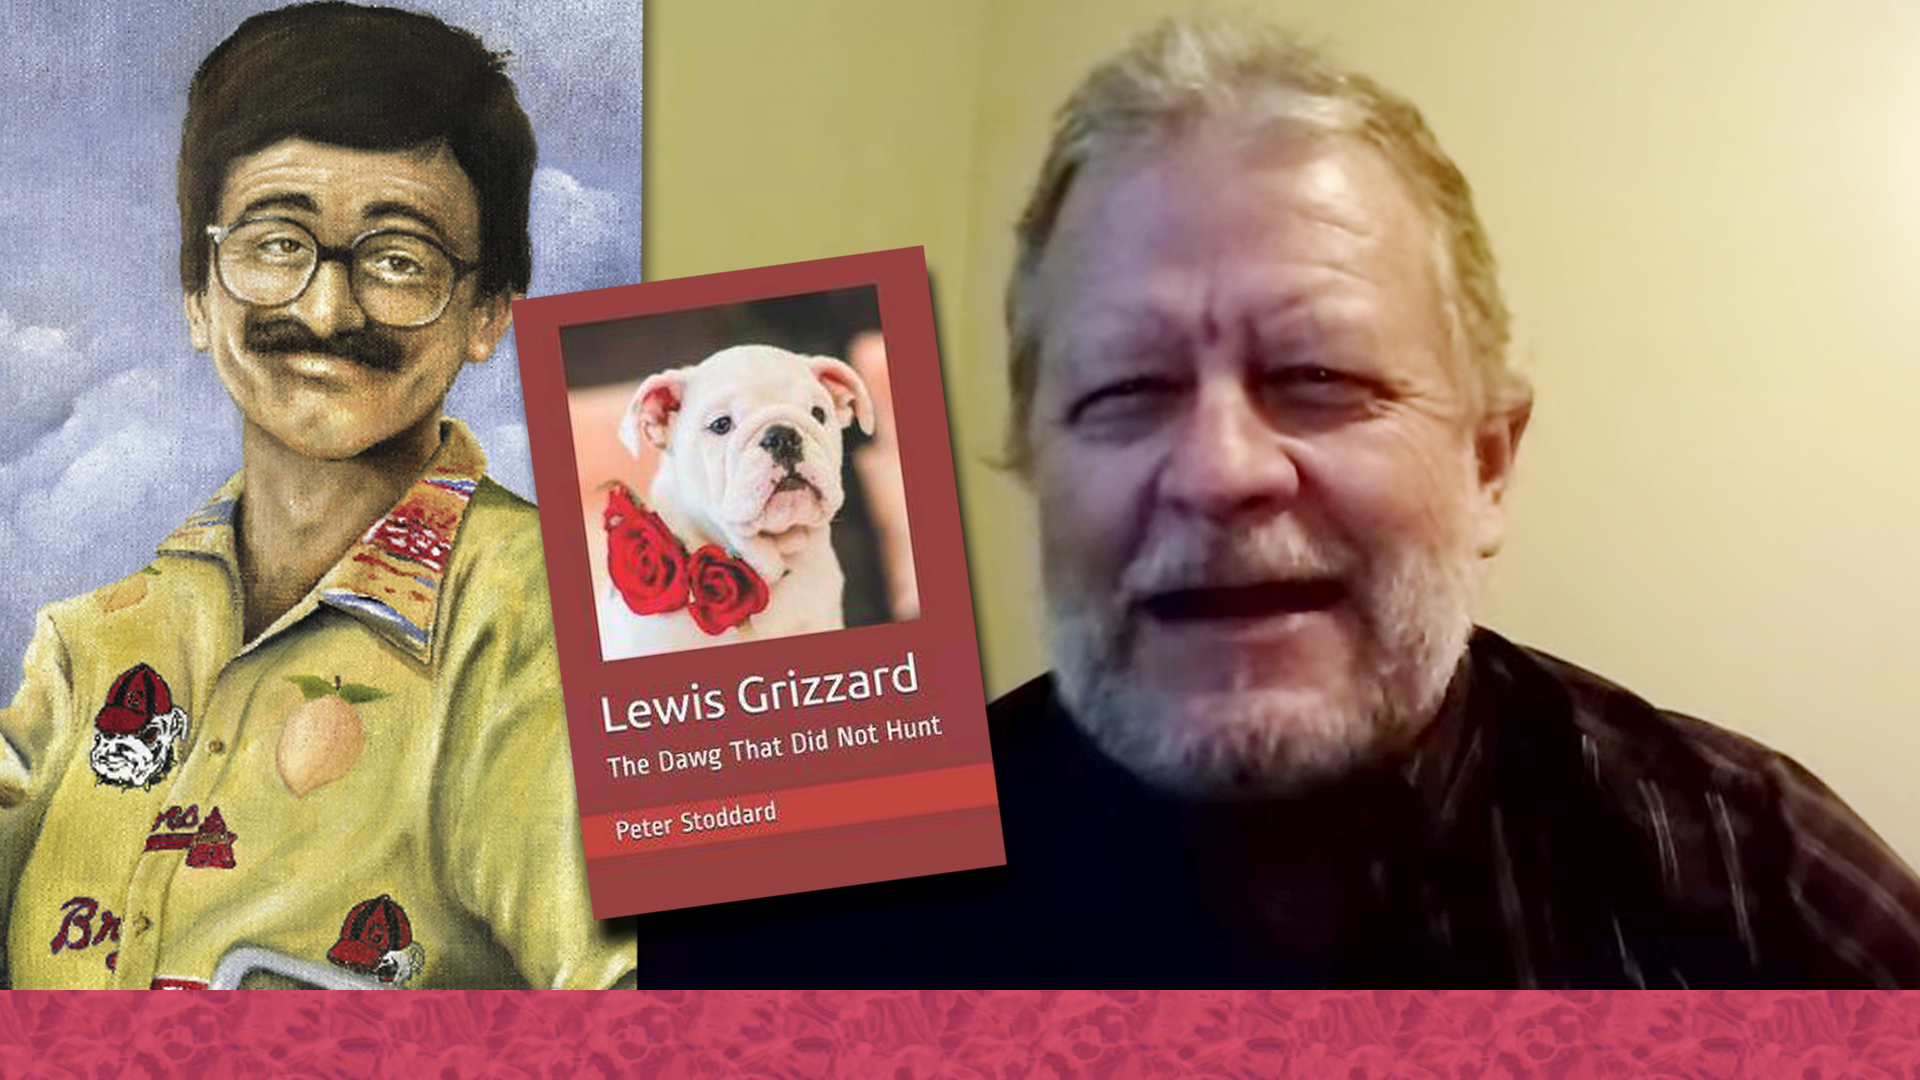 Lewis Grizzard Author Peter Stoddard - Yall.com